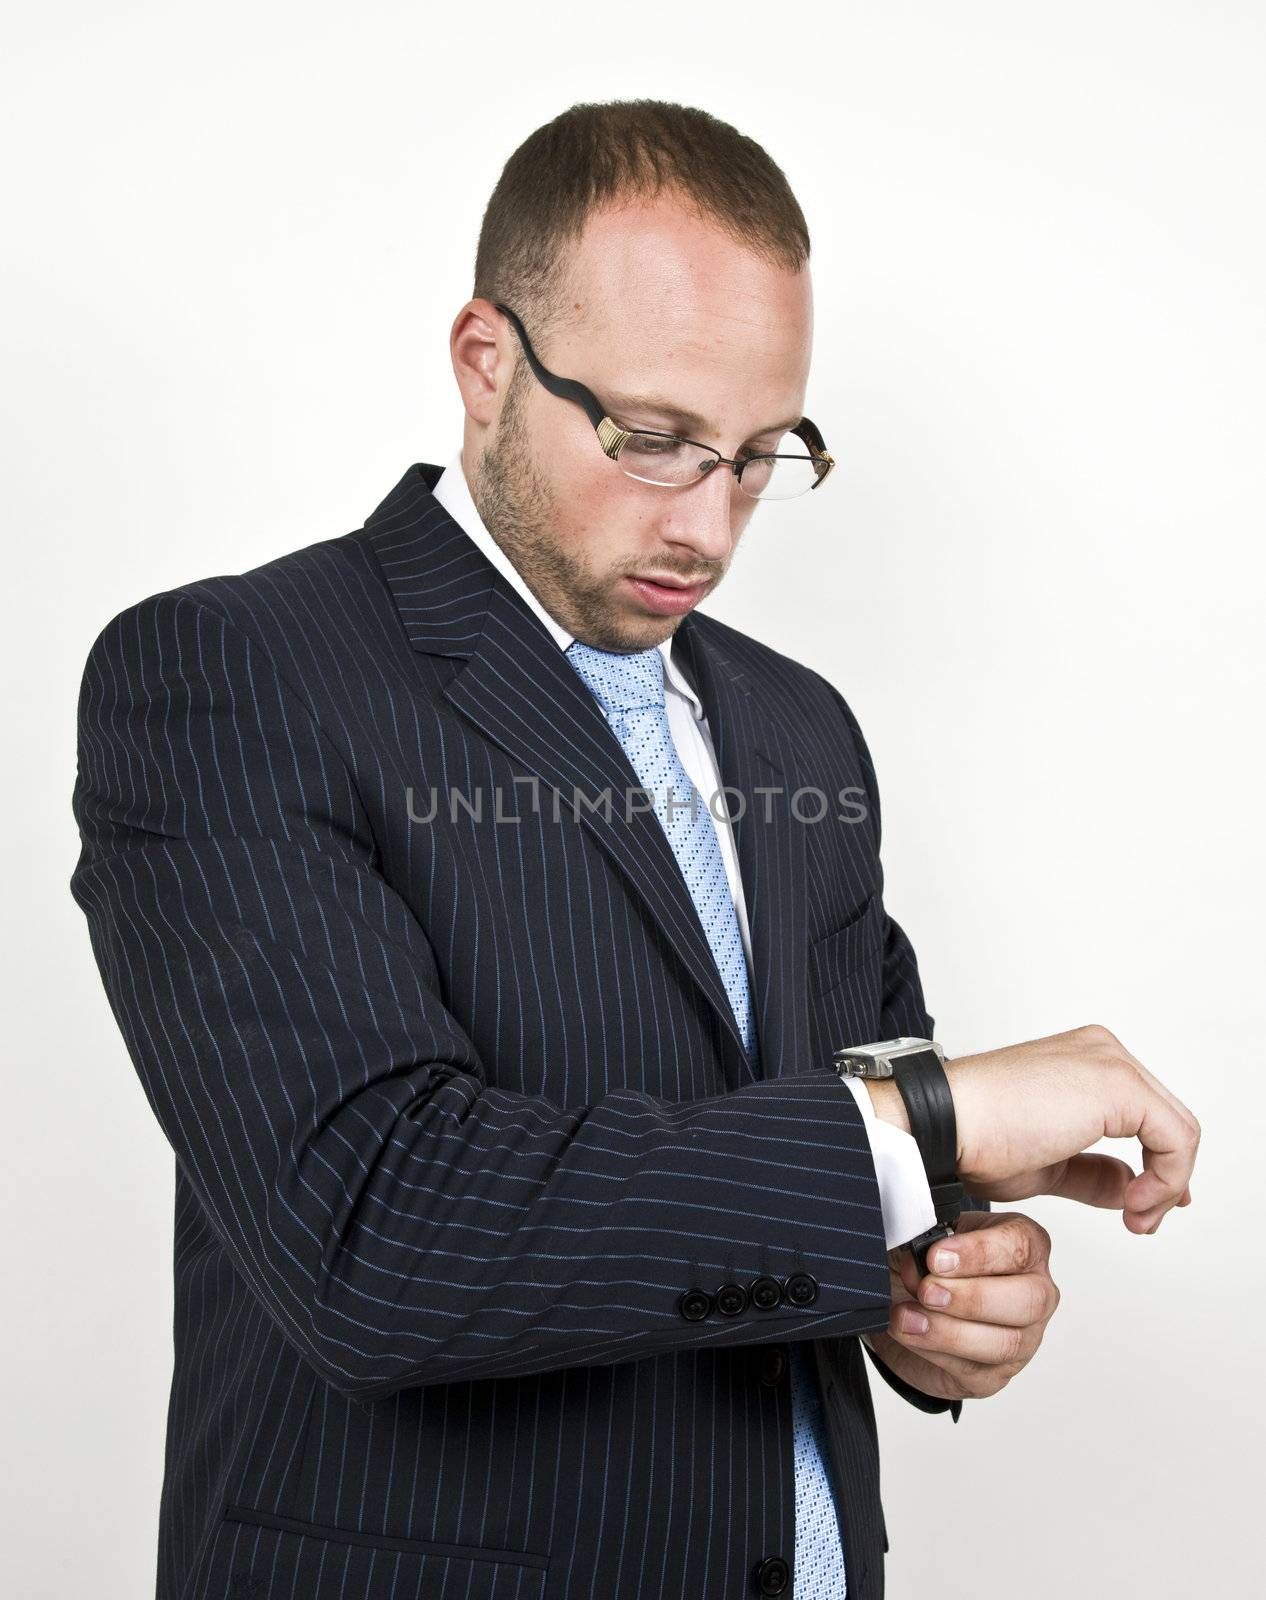 businessman tighting the watch-strap on isolated background

